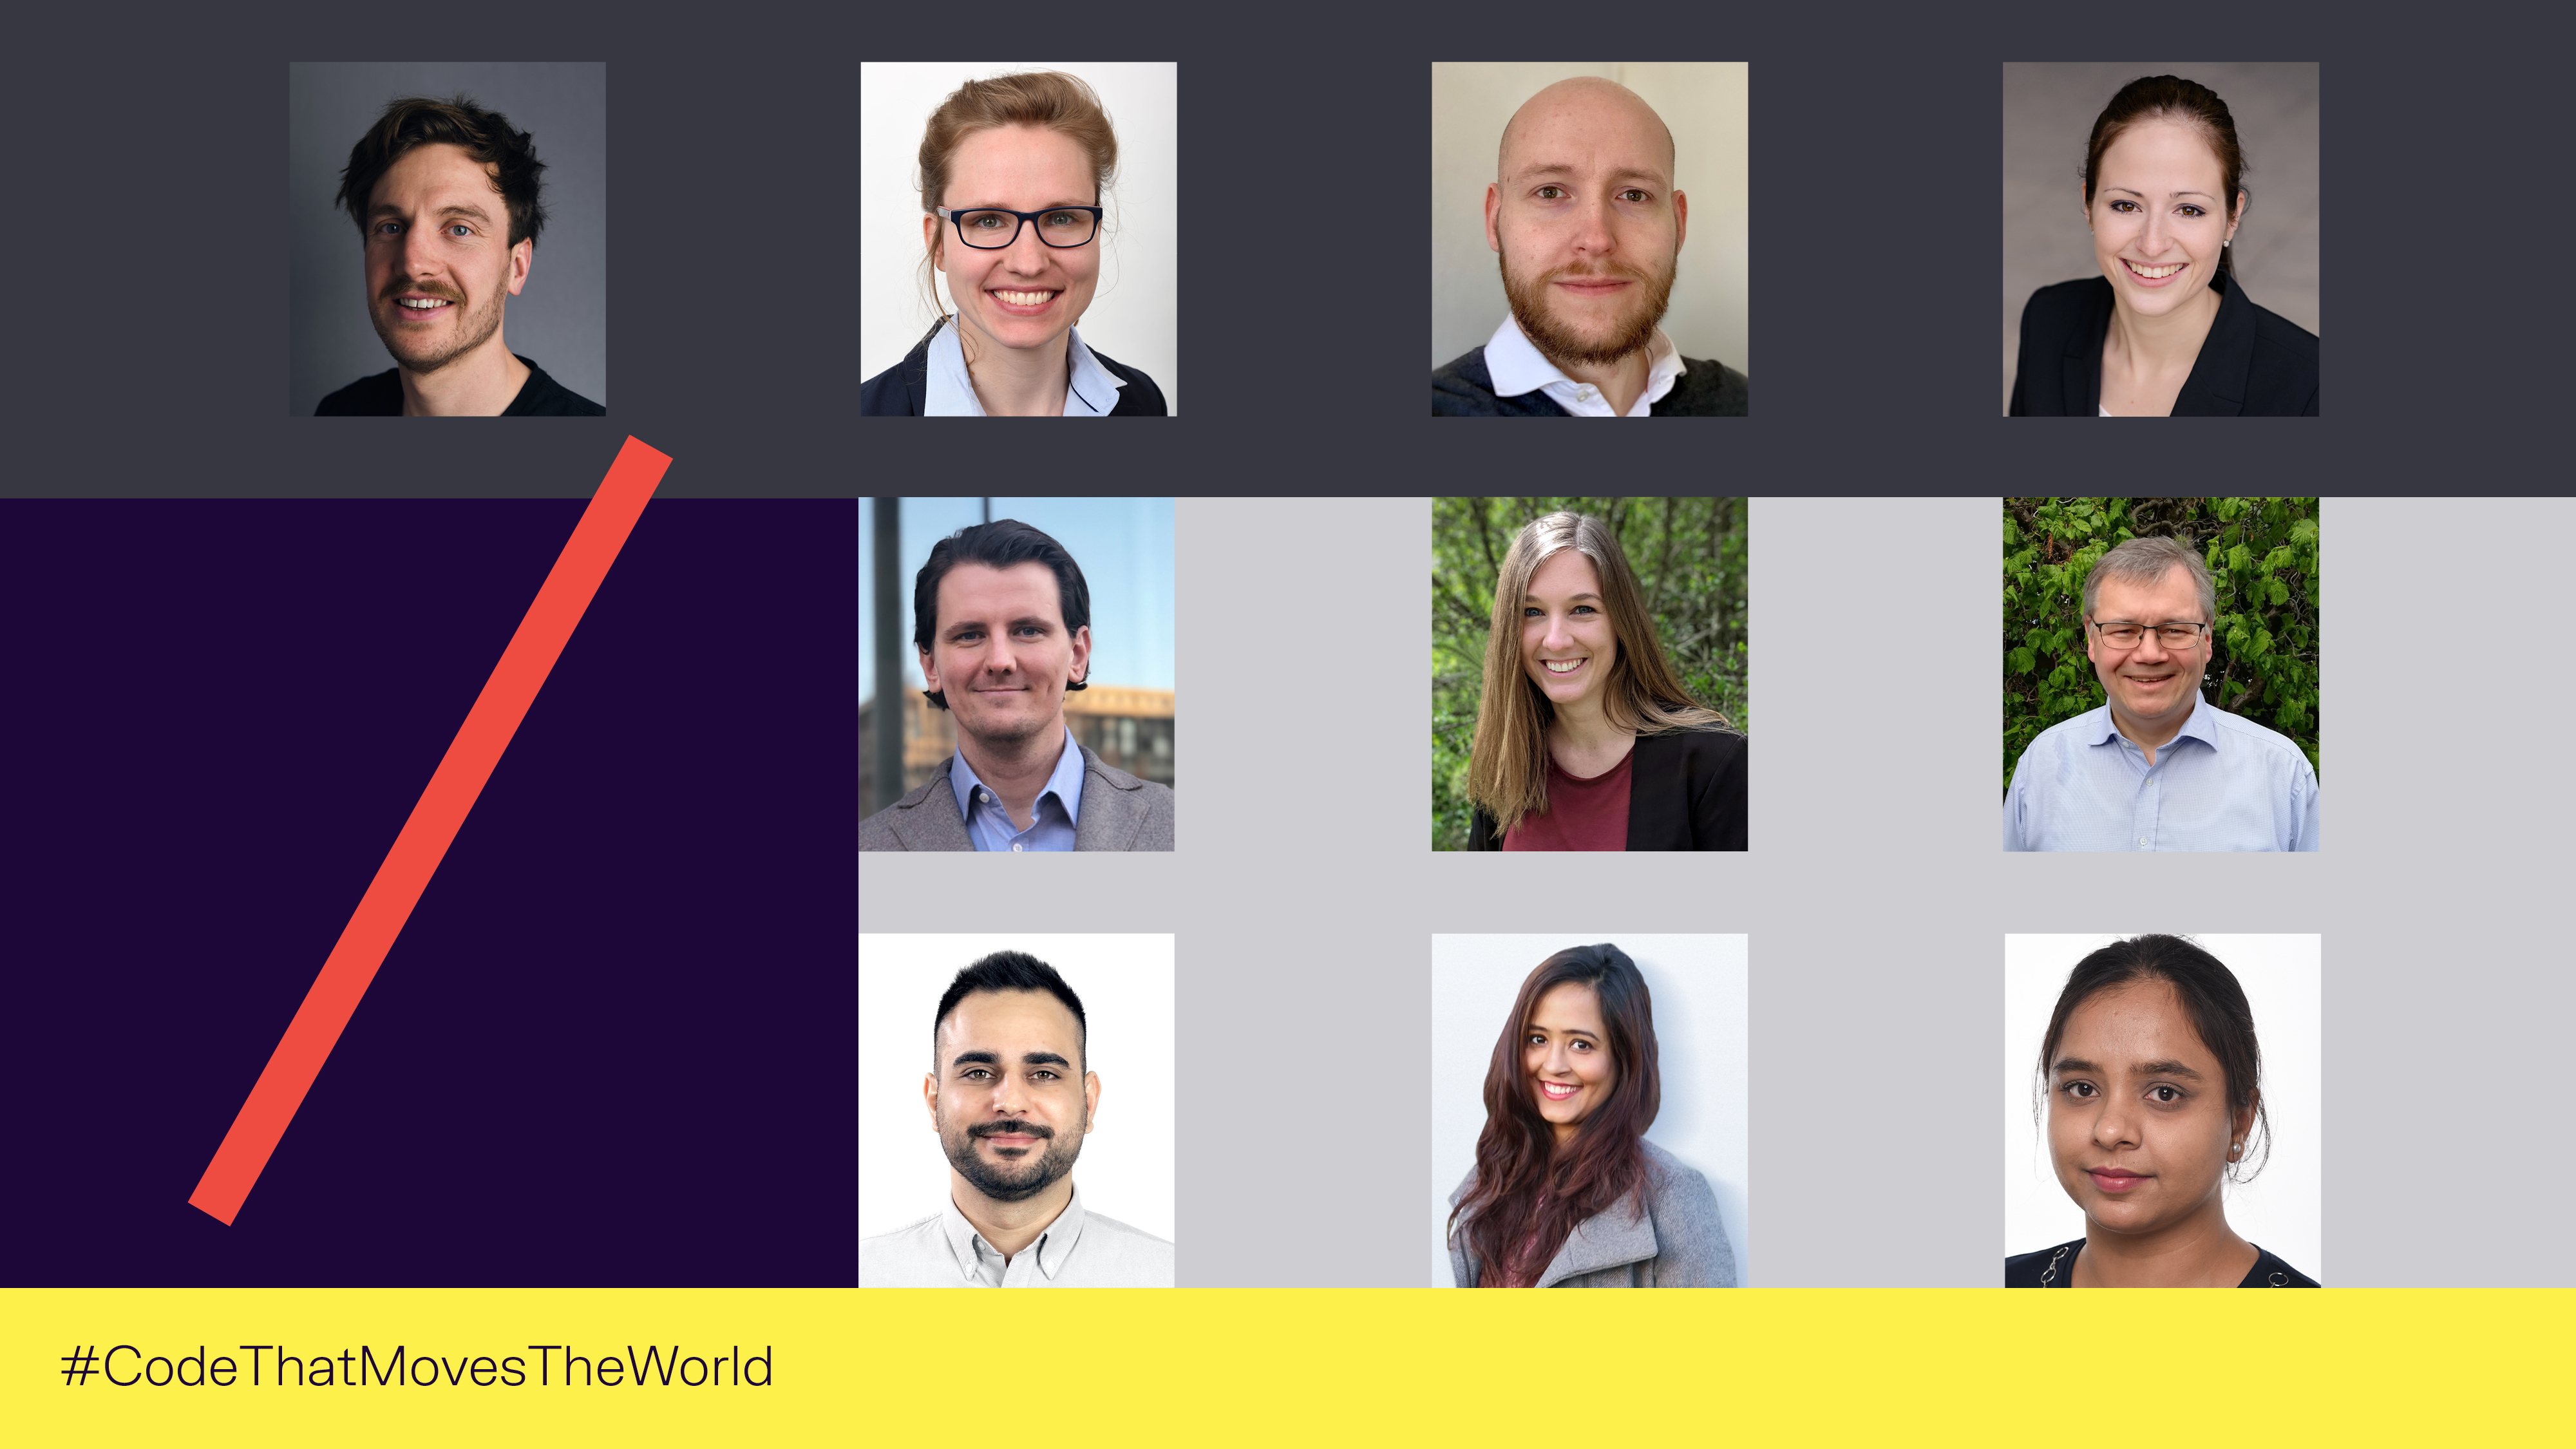 #CodeThatMovesTheWorld: What did we learn from our colleagues?